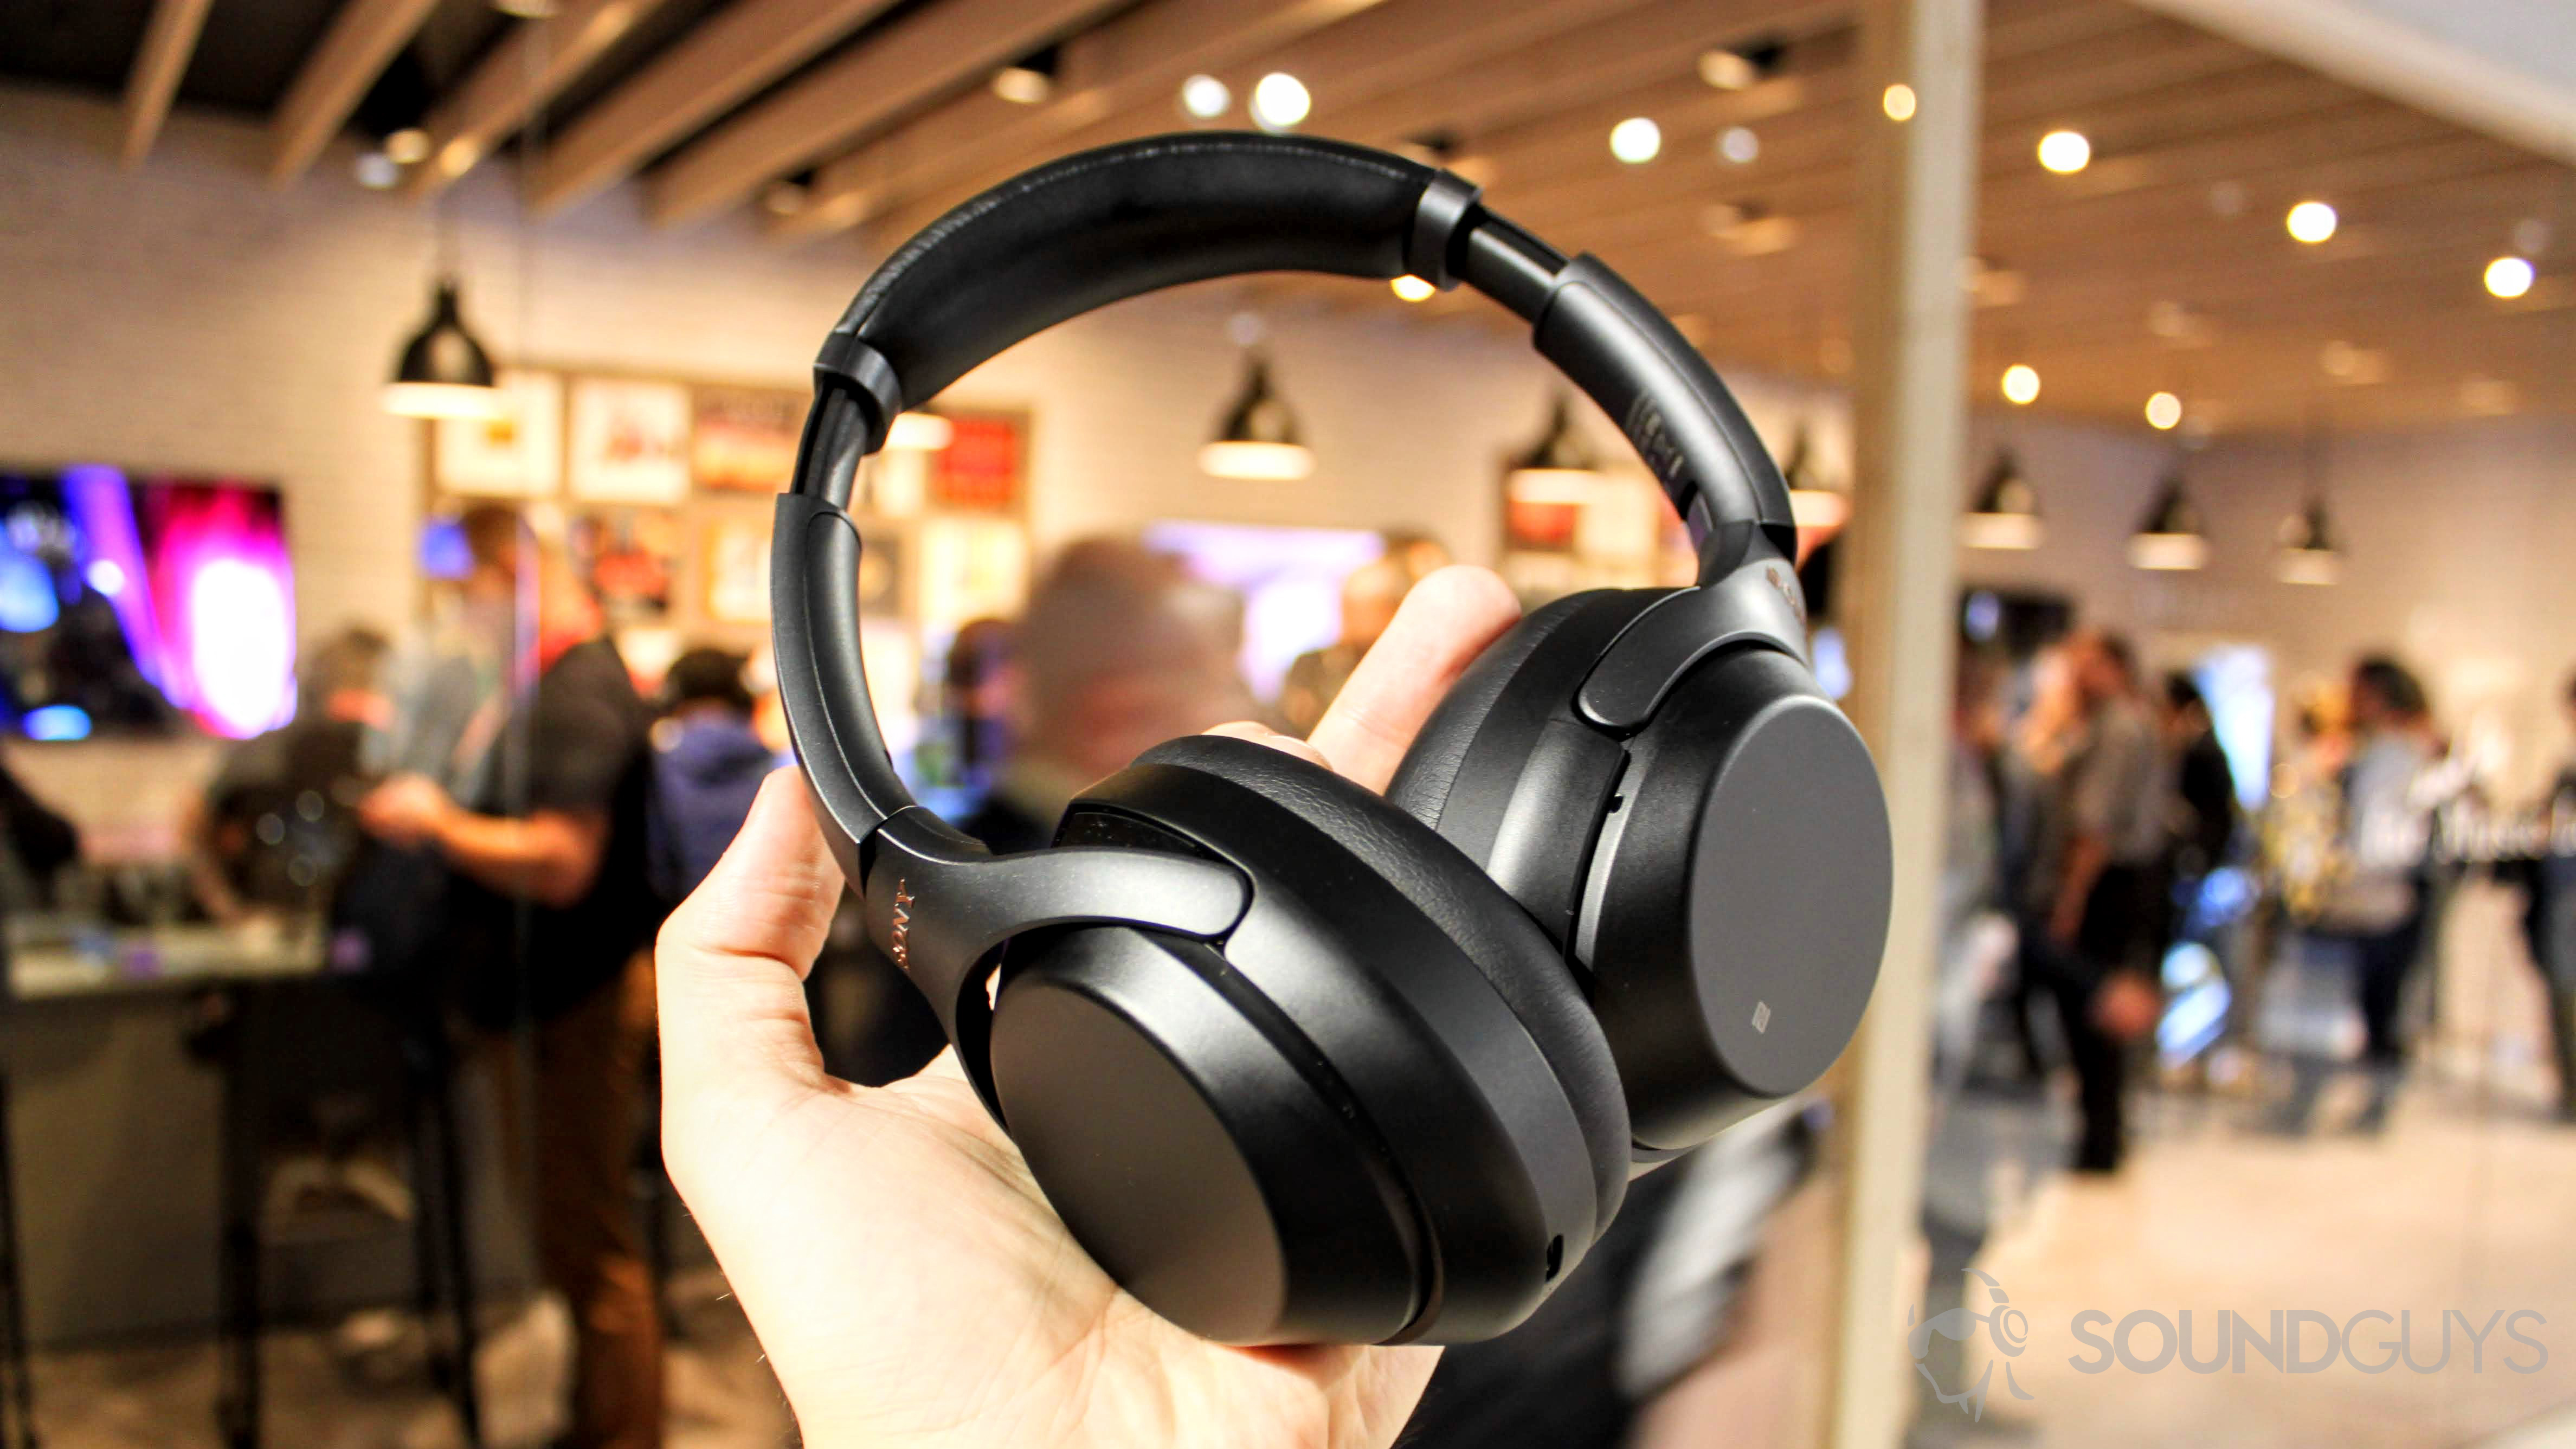 Sony WH-1000X M3 headphones in a hand.